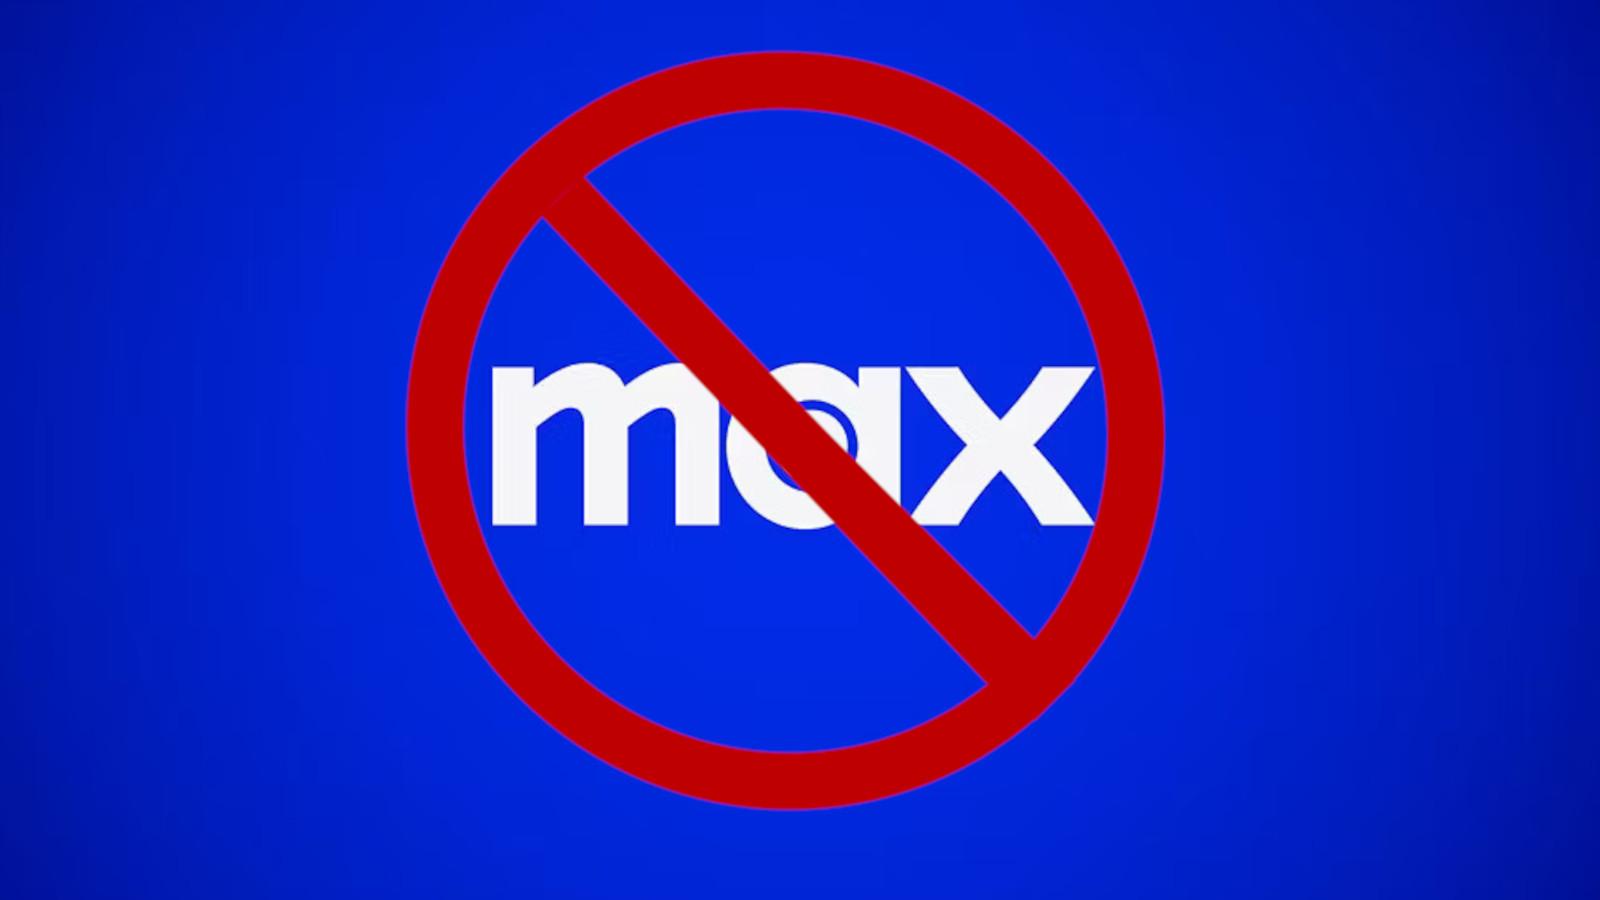 MAX logo with a red out symbol